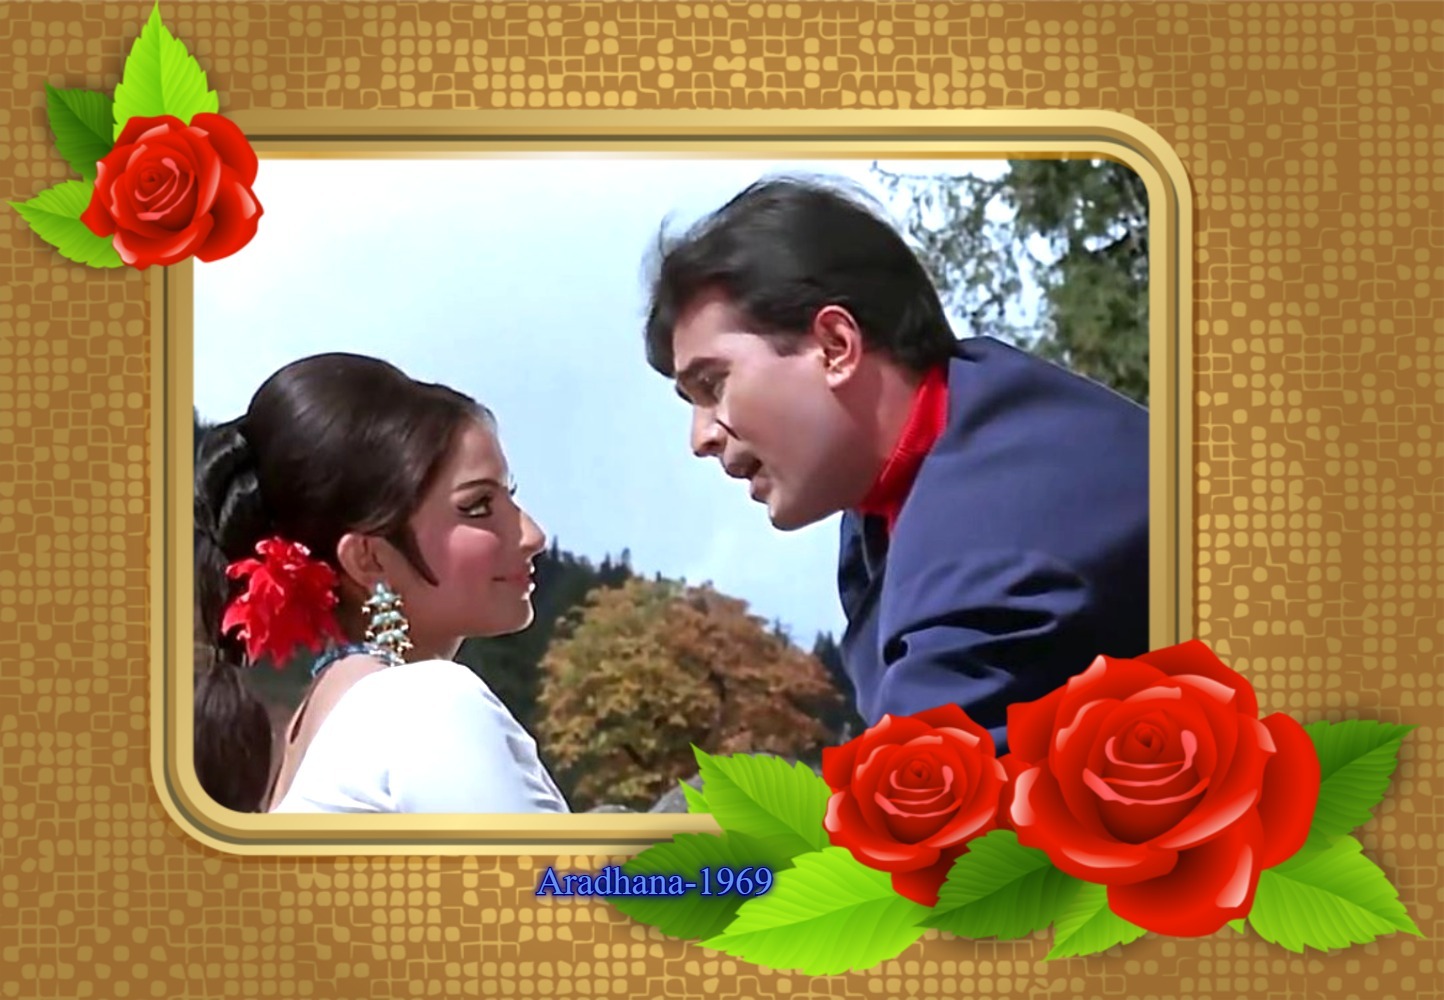 You are currently viewing “Rajesh Khanna- A Charismatic Superstar”